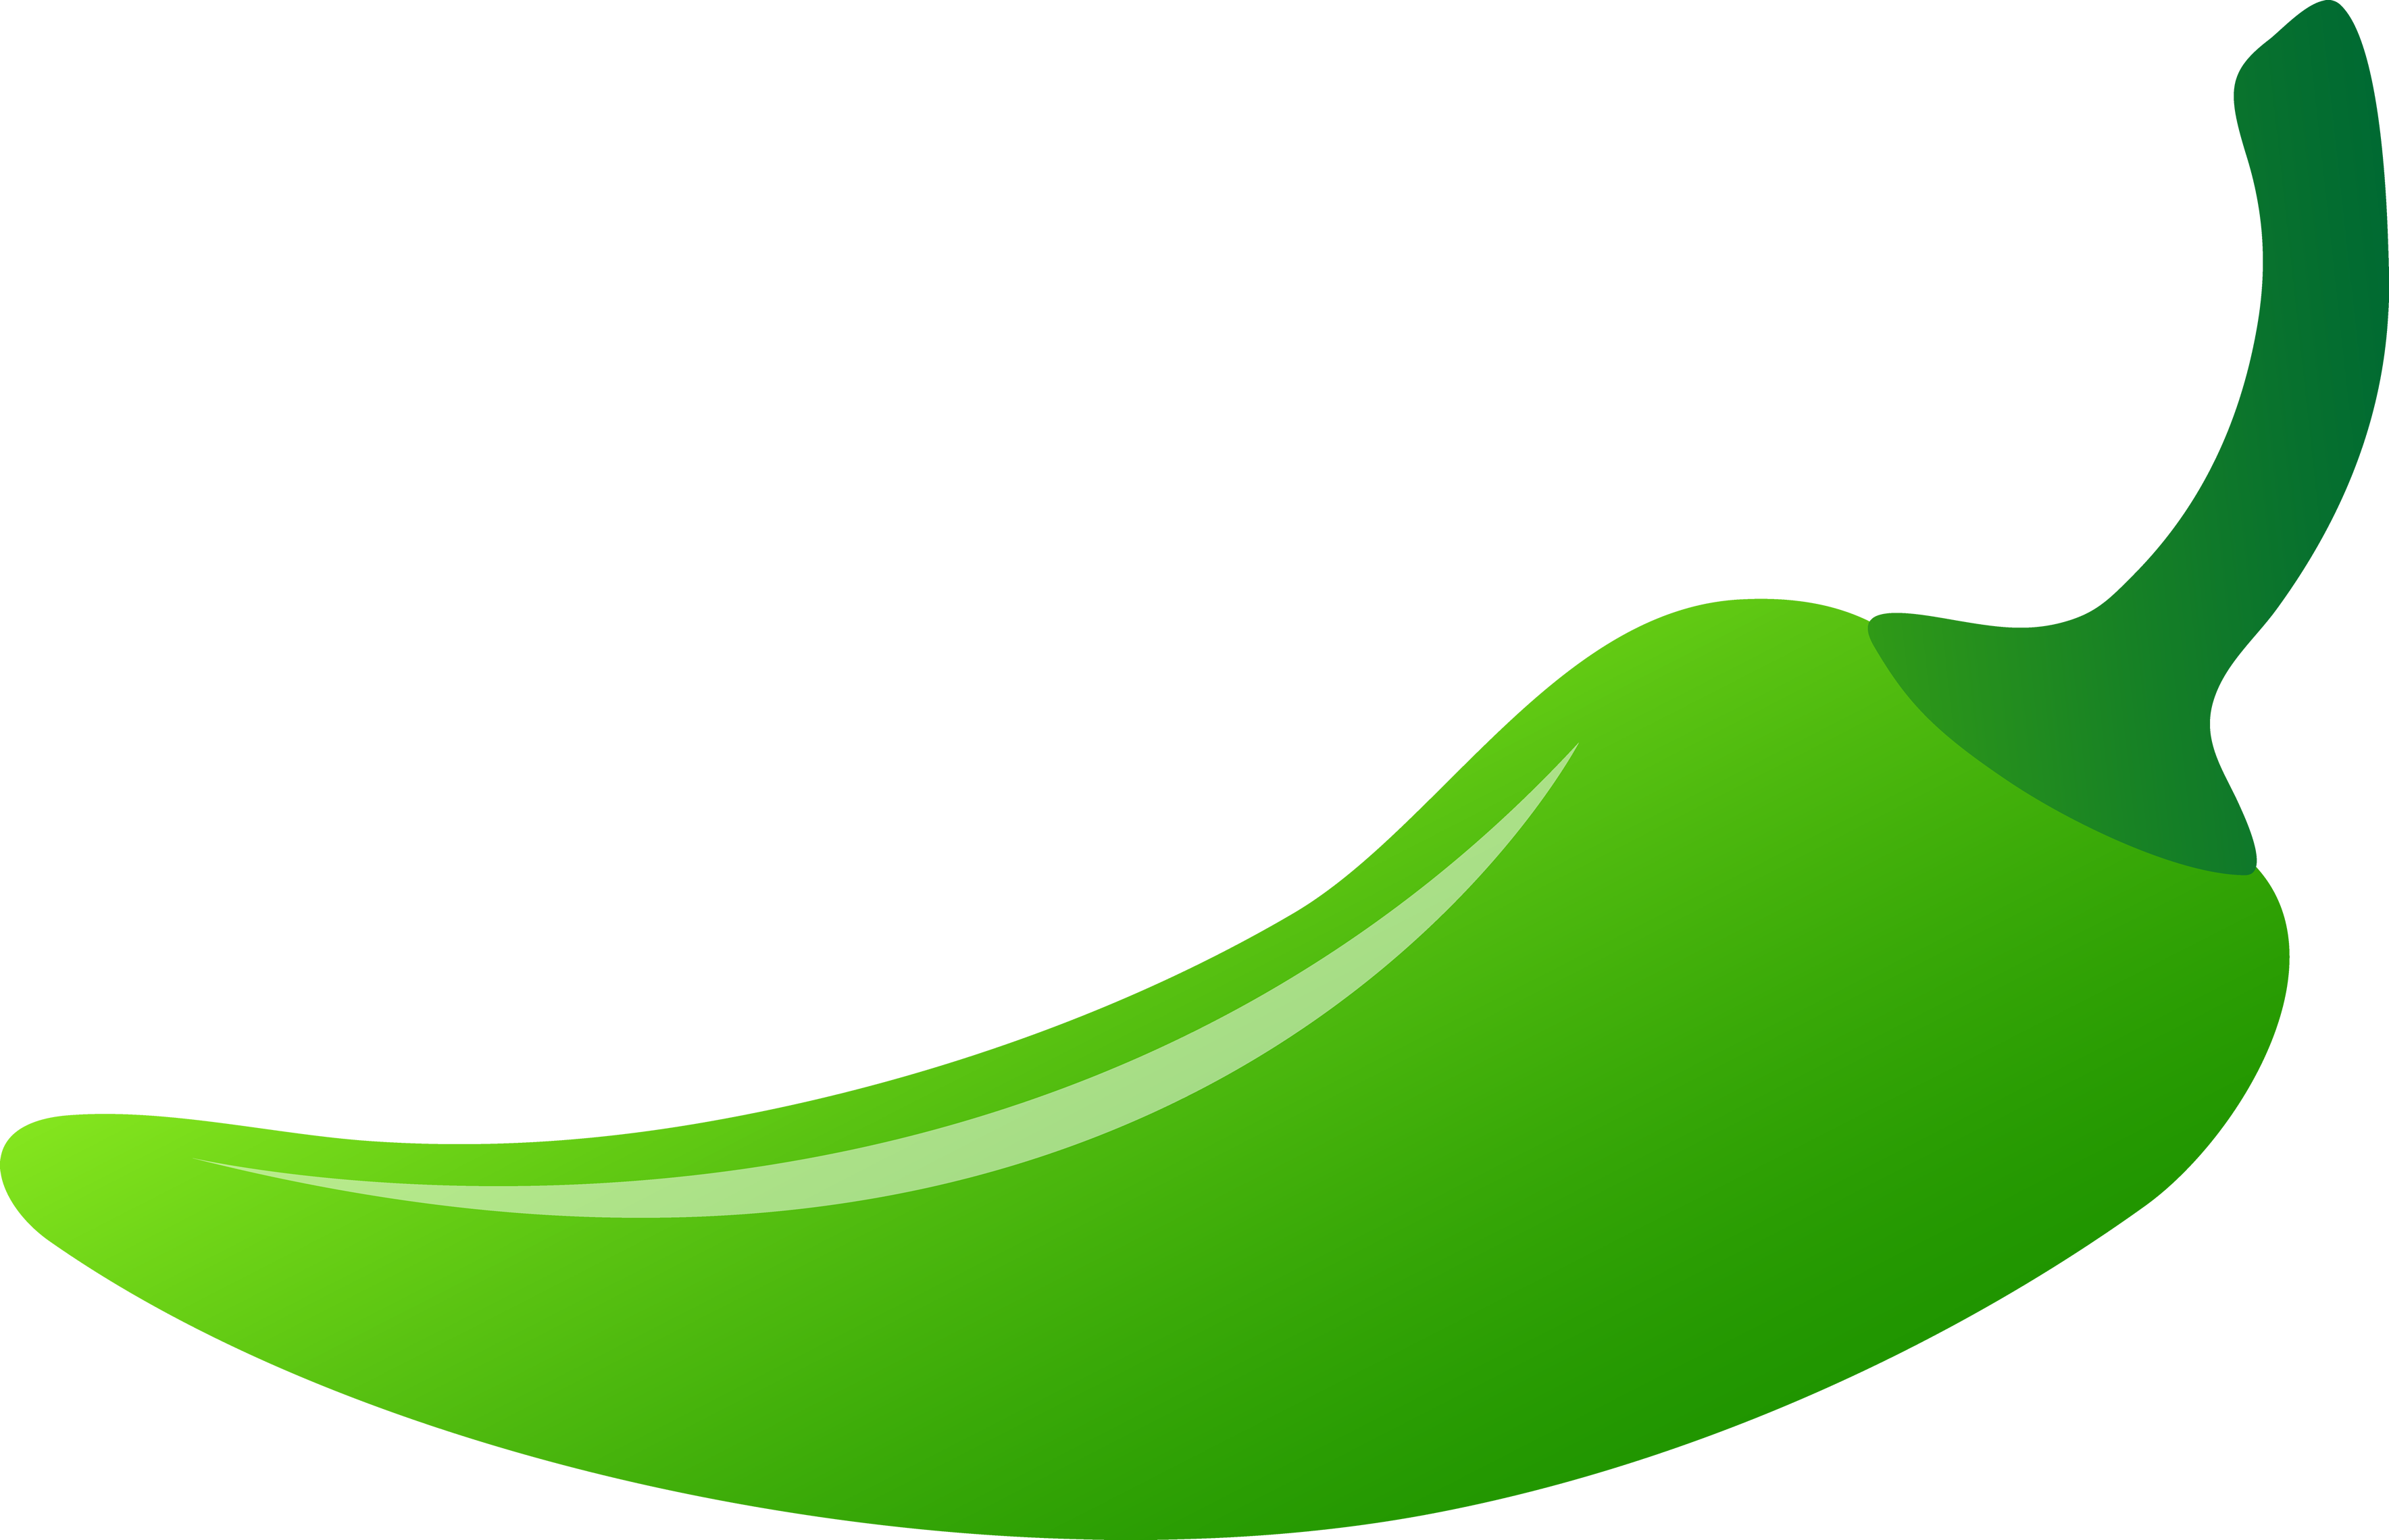 Green pepper PNG image